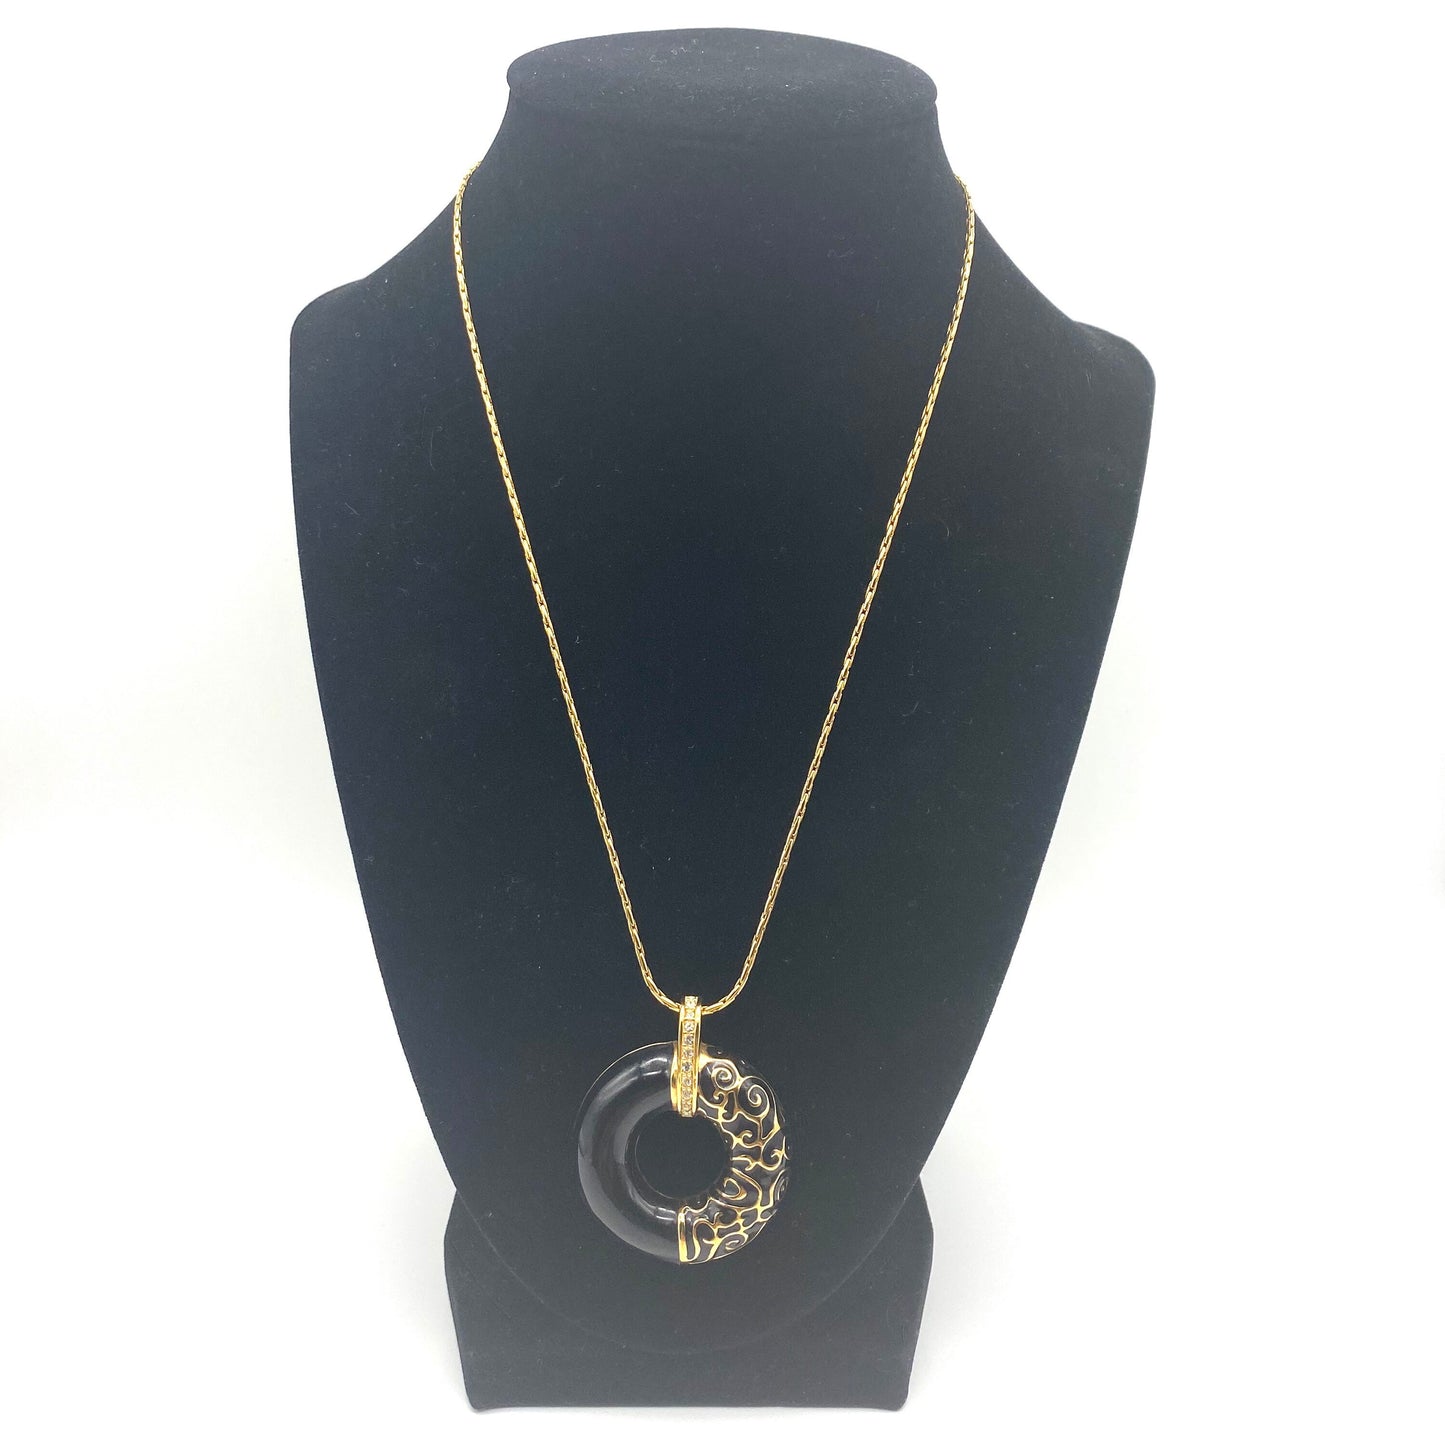 Camrose and Kross Jacqueline Kennedy Black Enamel, Crystal and Gold Plate "Parisian Circle' Pendant in Original Box